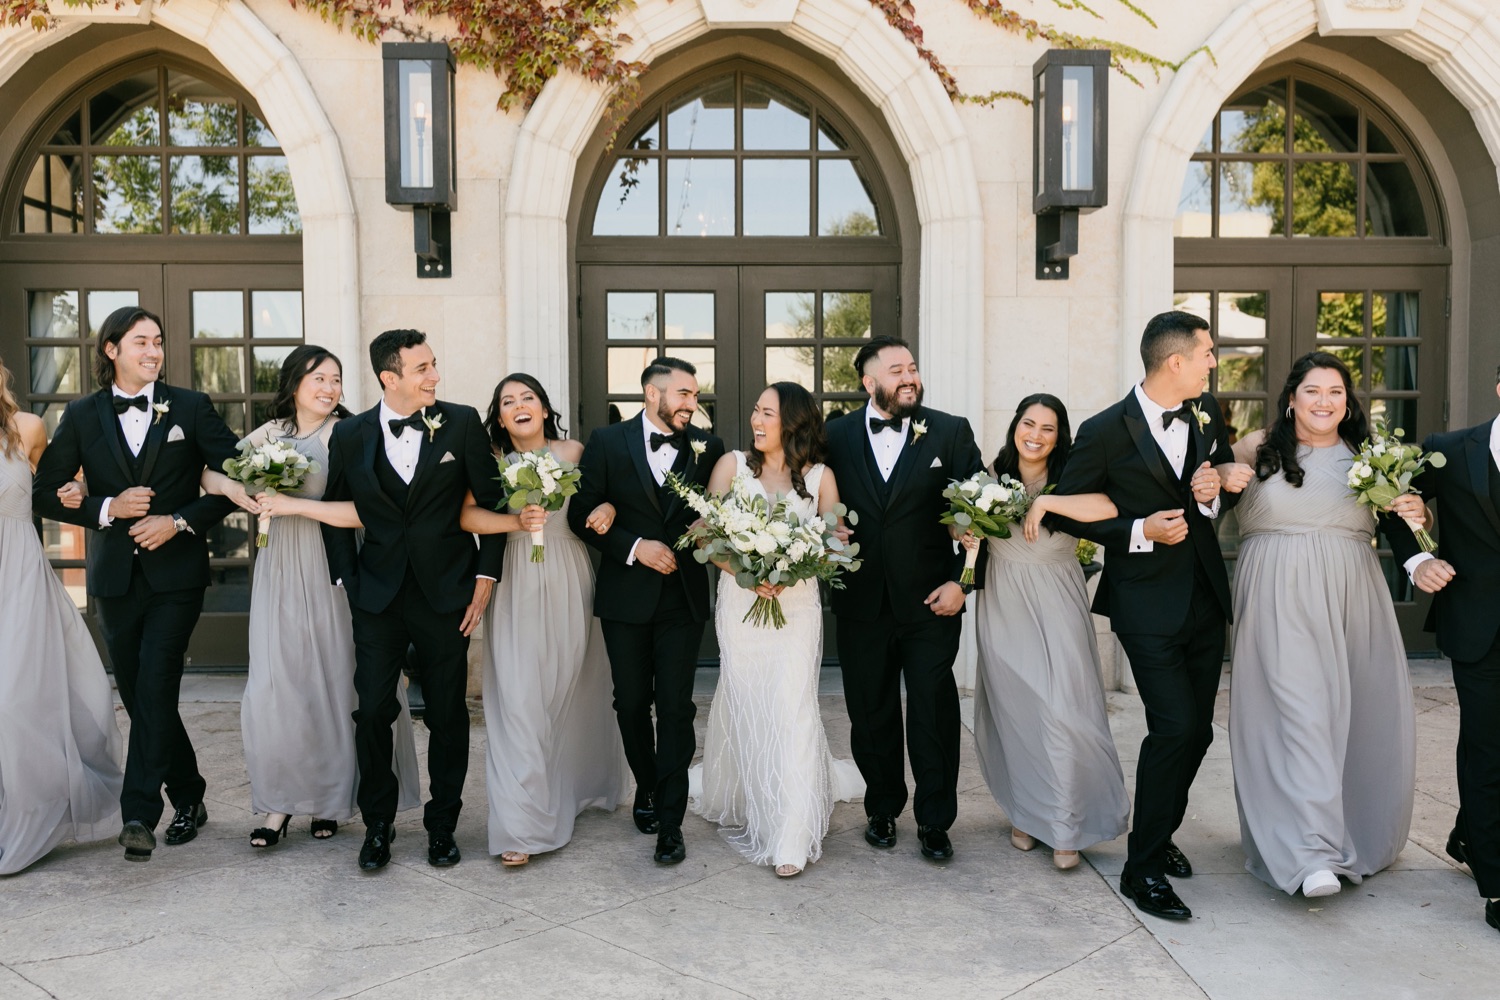 Tooth and nail wedding party portraits by tayler enerle 